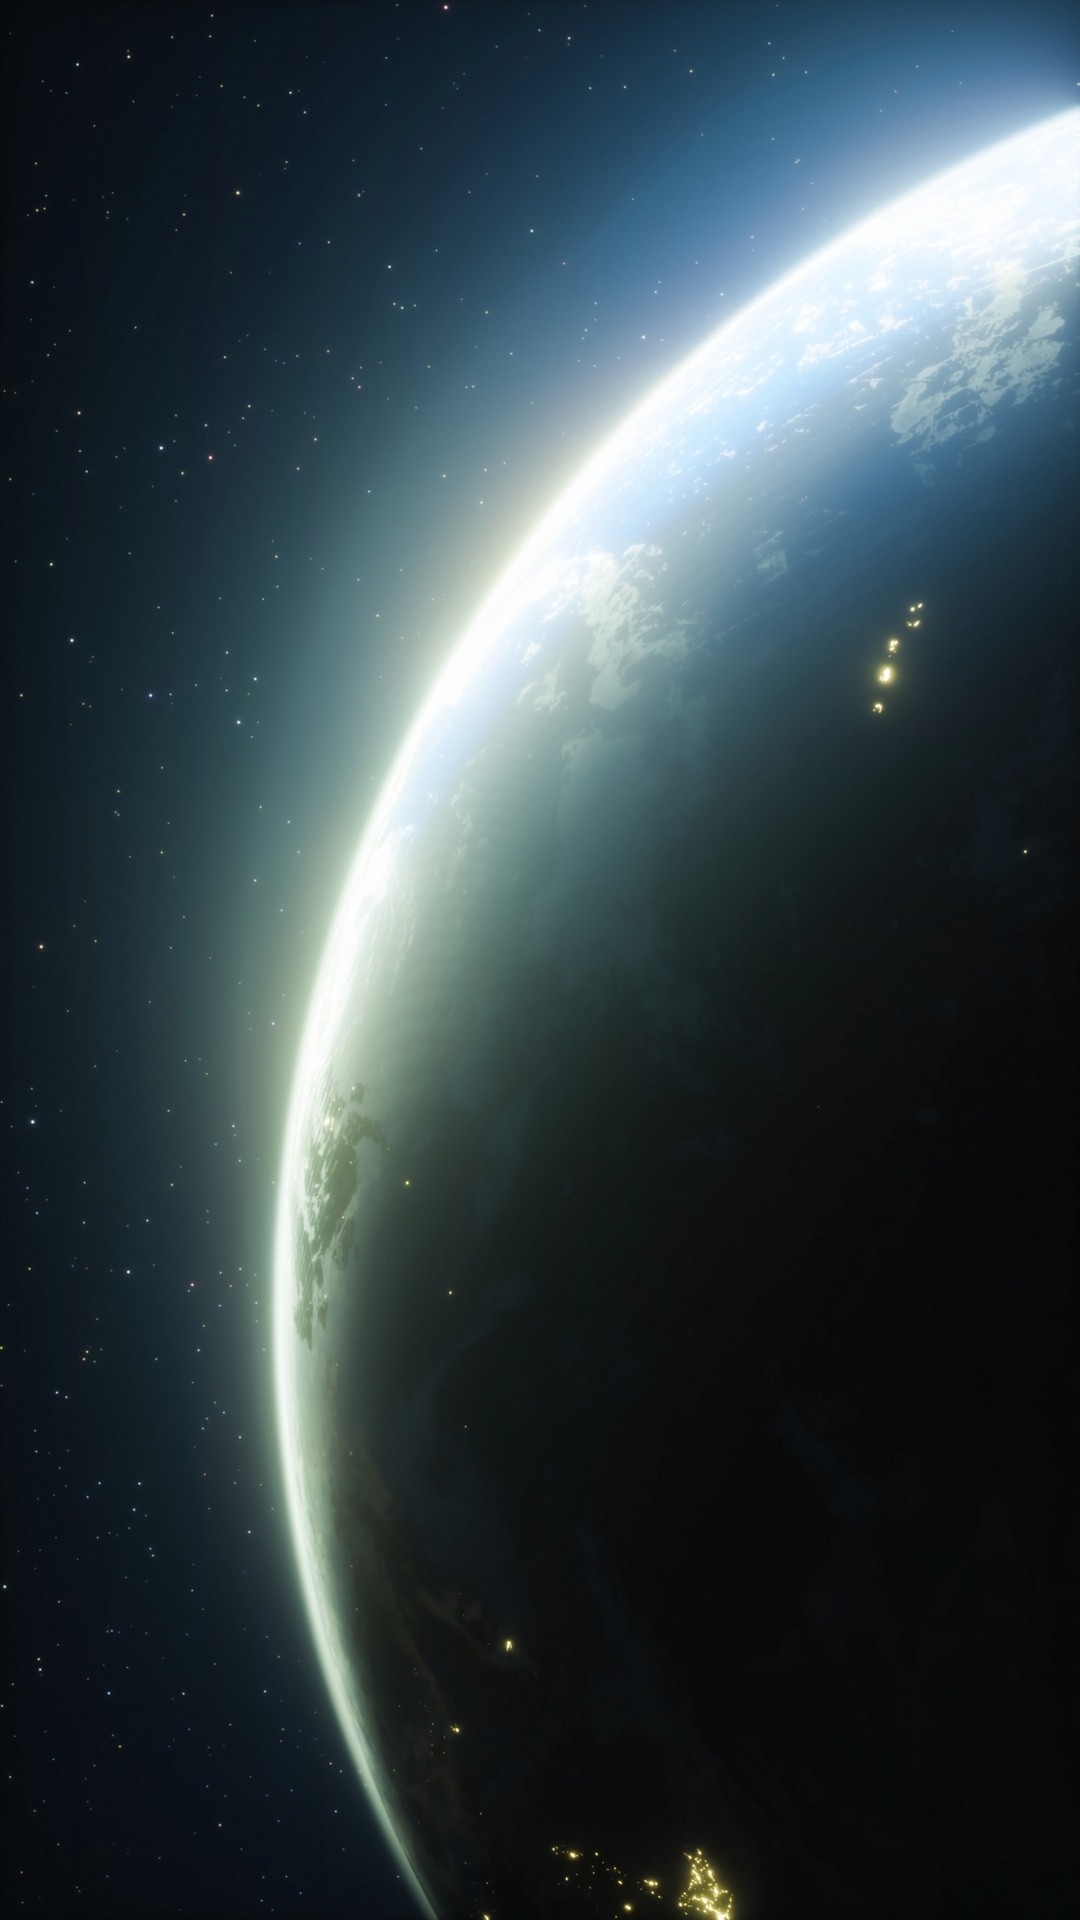 Earth wallpaper for android